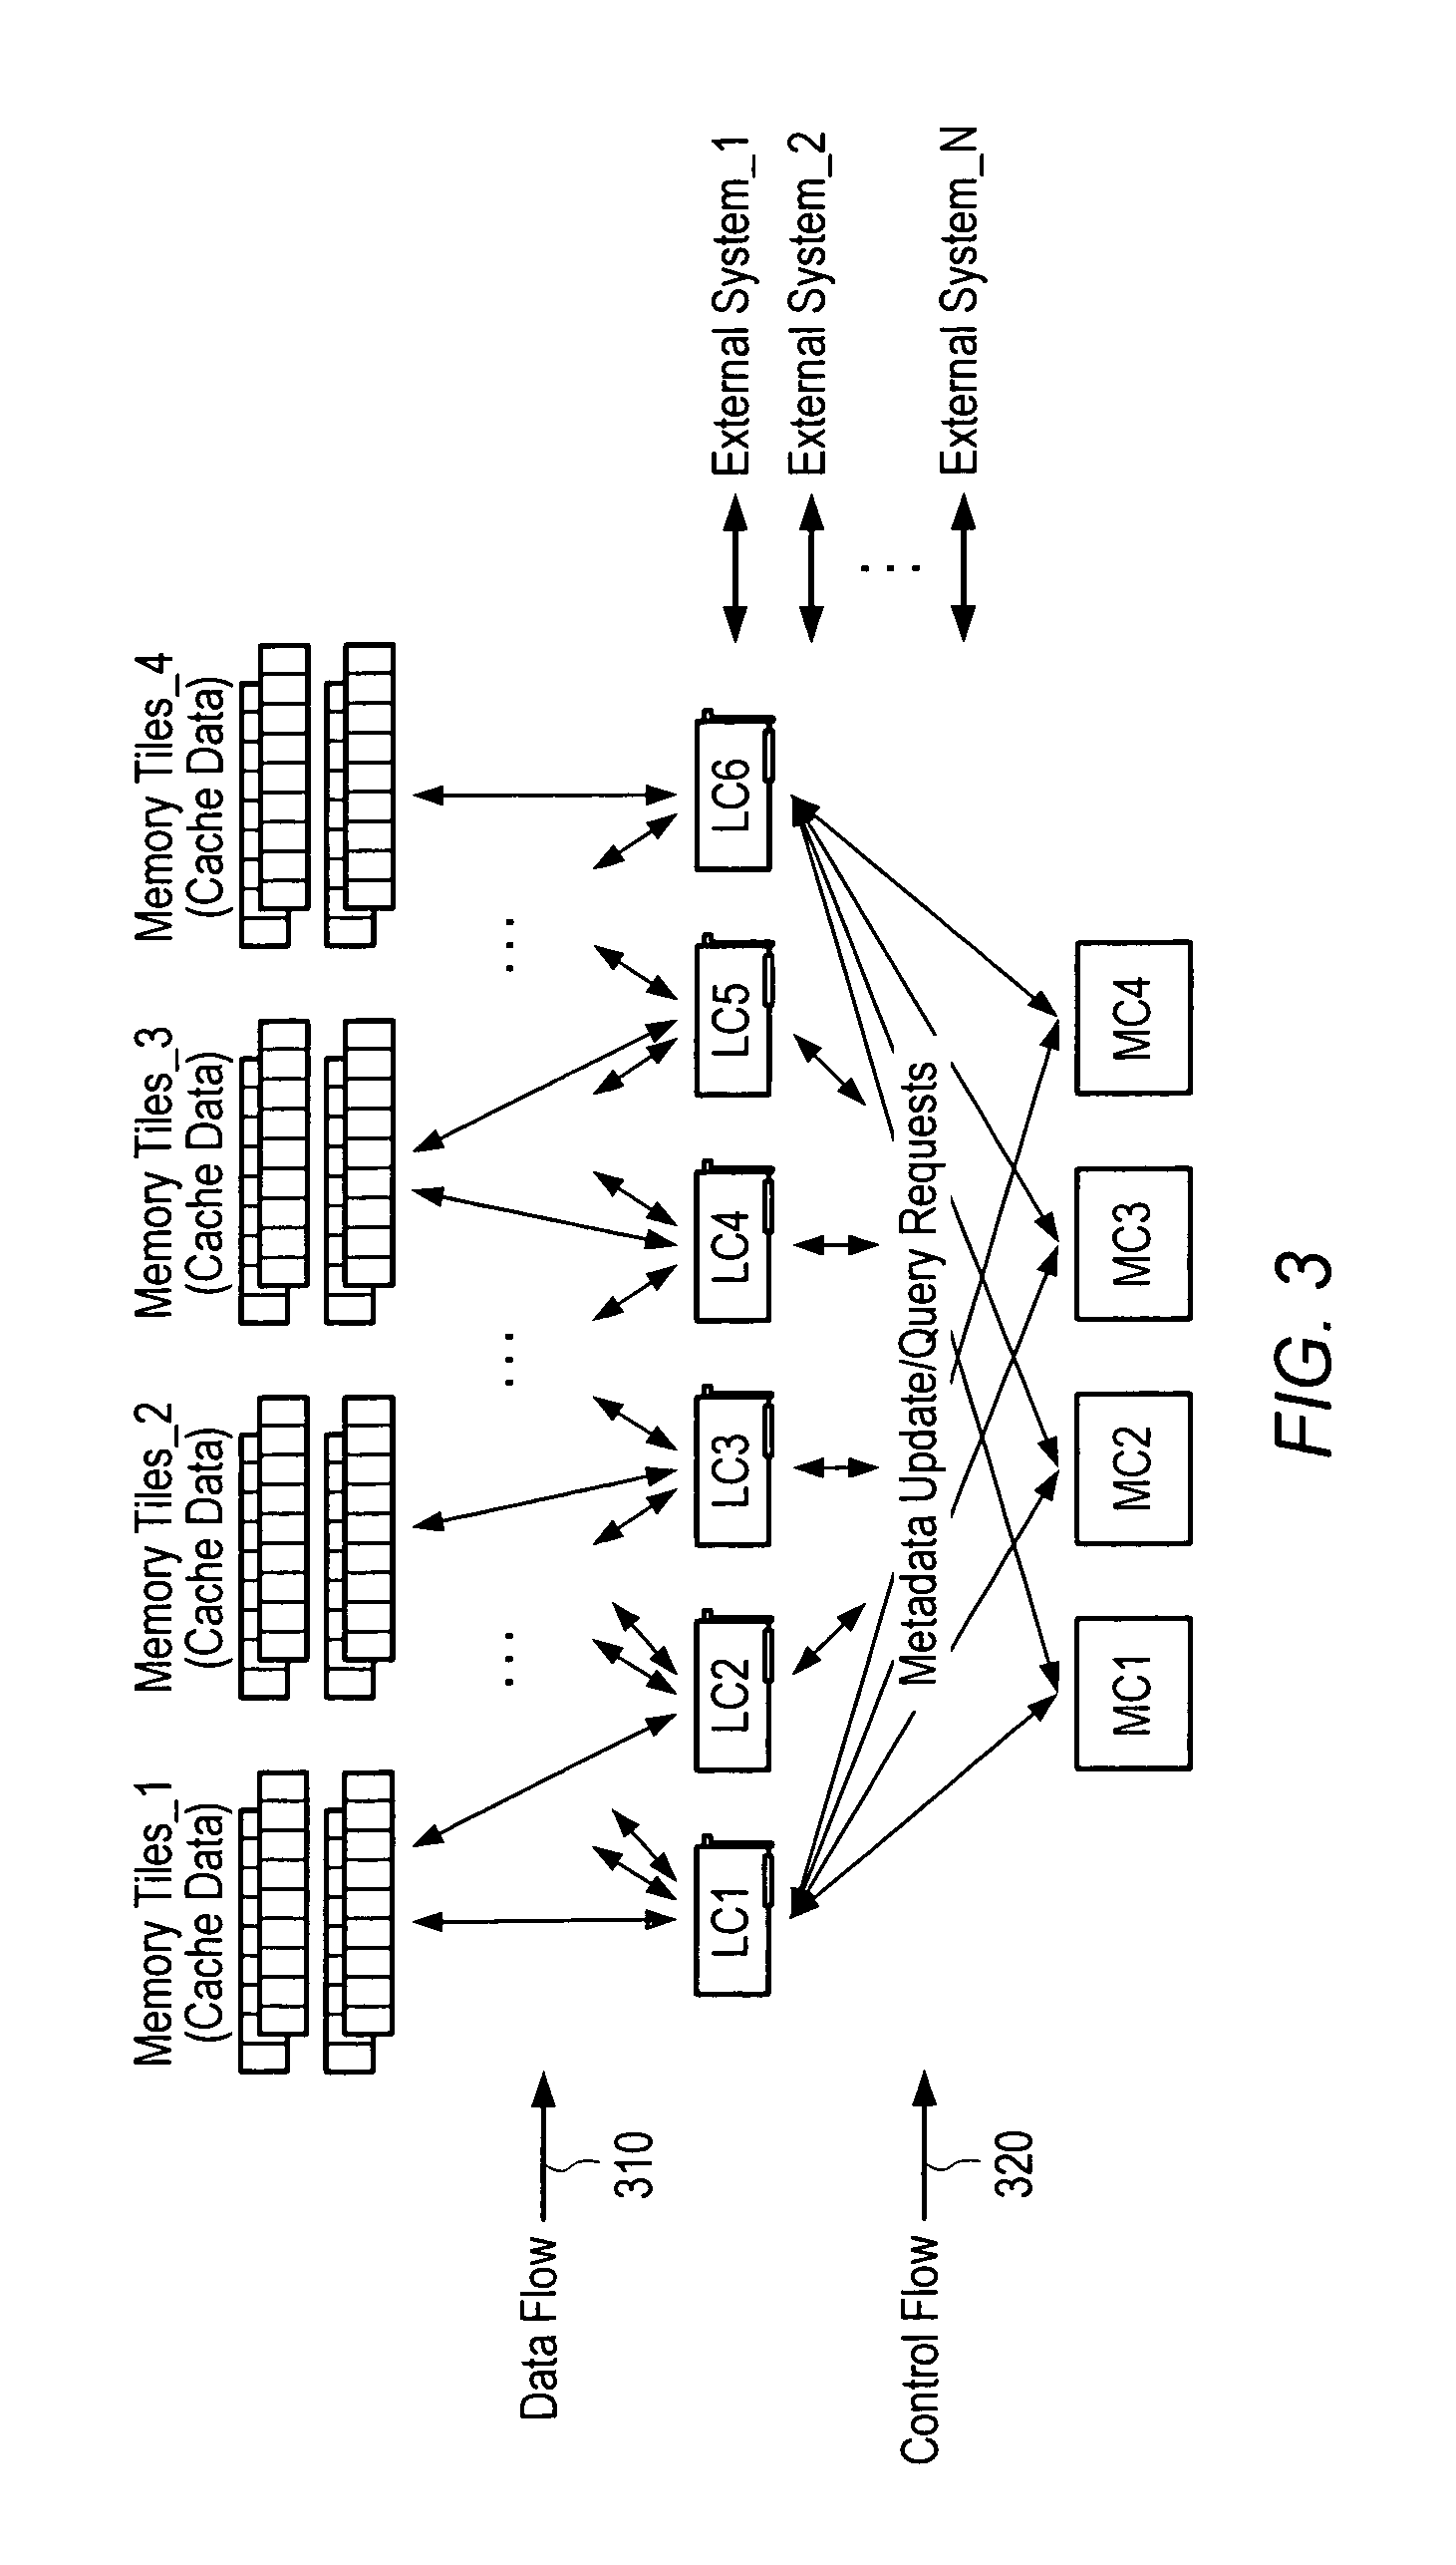 Data storage system using 3-party hand-off protocol to facilitate failure recovery